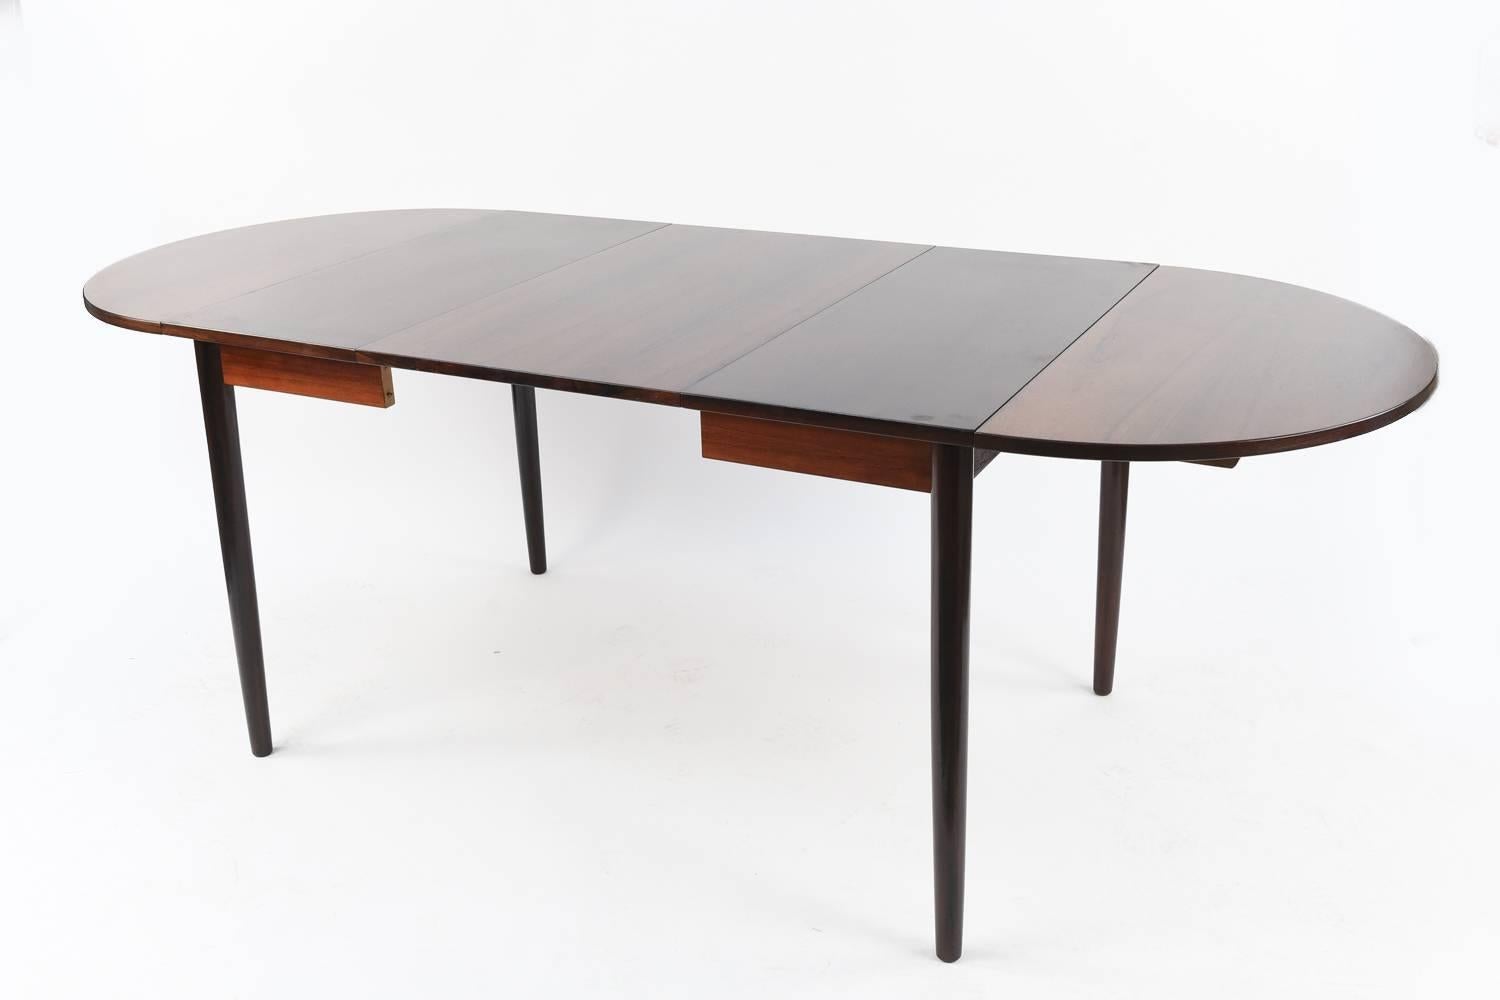 This is a stunning Danish mid-century dining table made of rosewood with a handsome color and grain. Multiple leaves allow for easy extension to accommodate guests. The table with all four leaves installed opens to 102.5" wide.